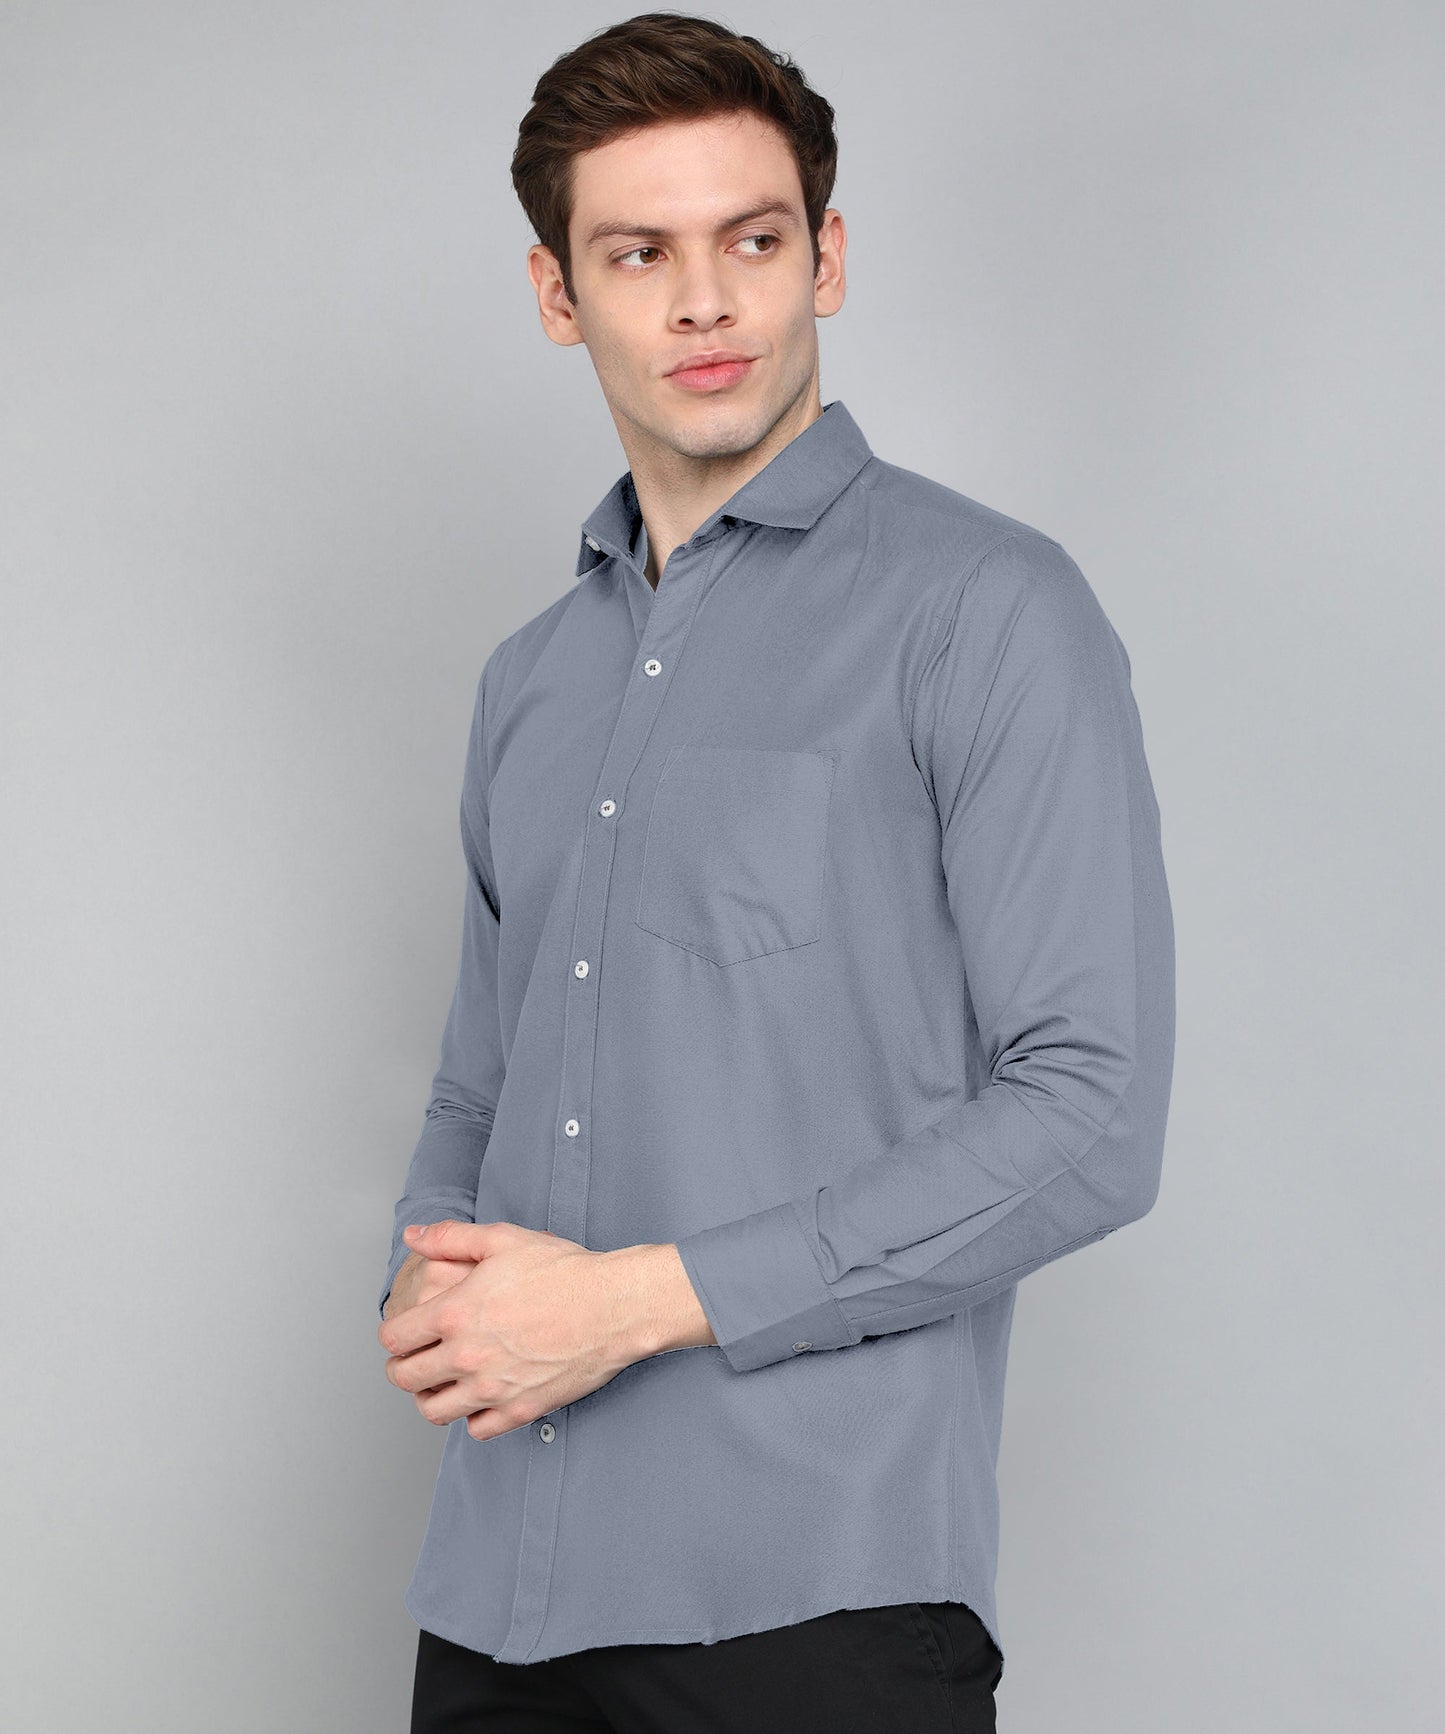 Slim fit Regular Cotton Casual Shirt with Spread Collar & full Sleeve #Shirt for Man